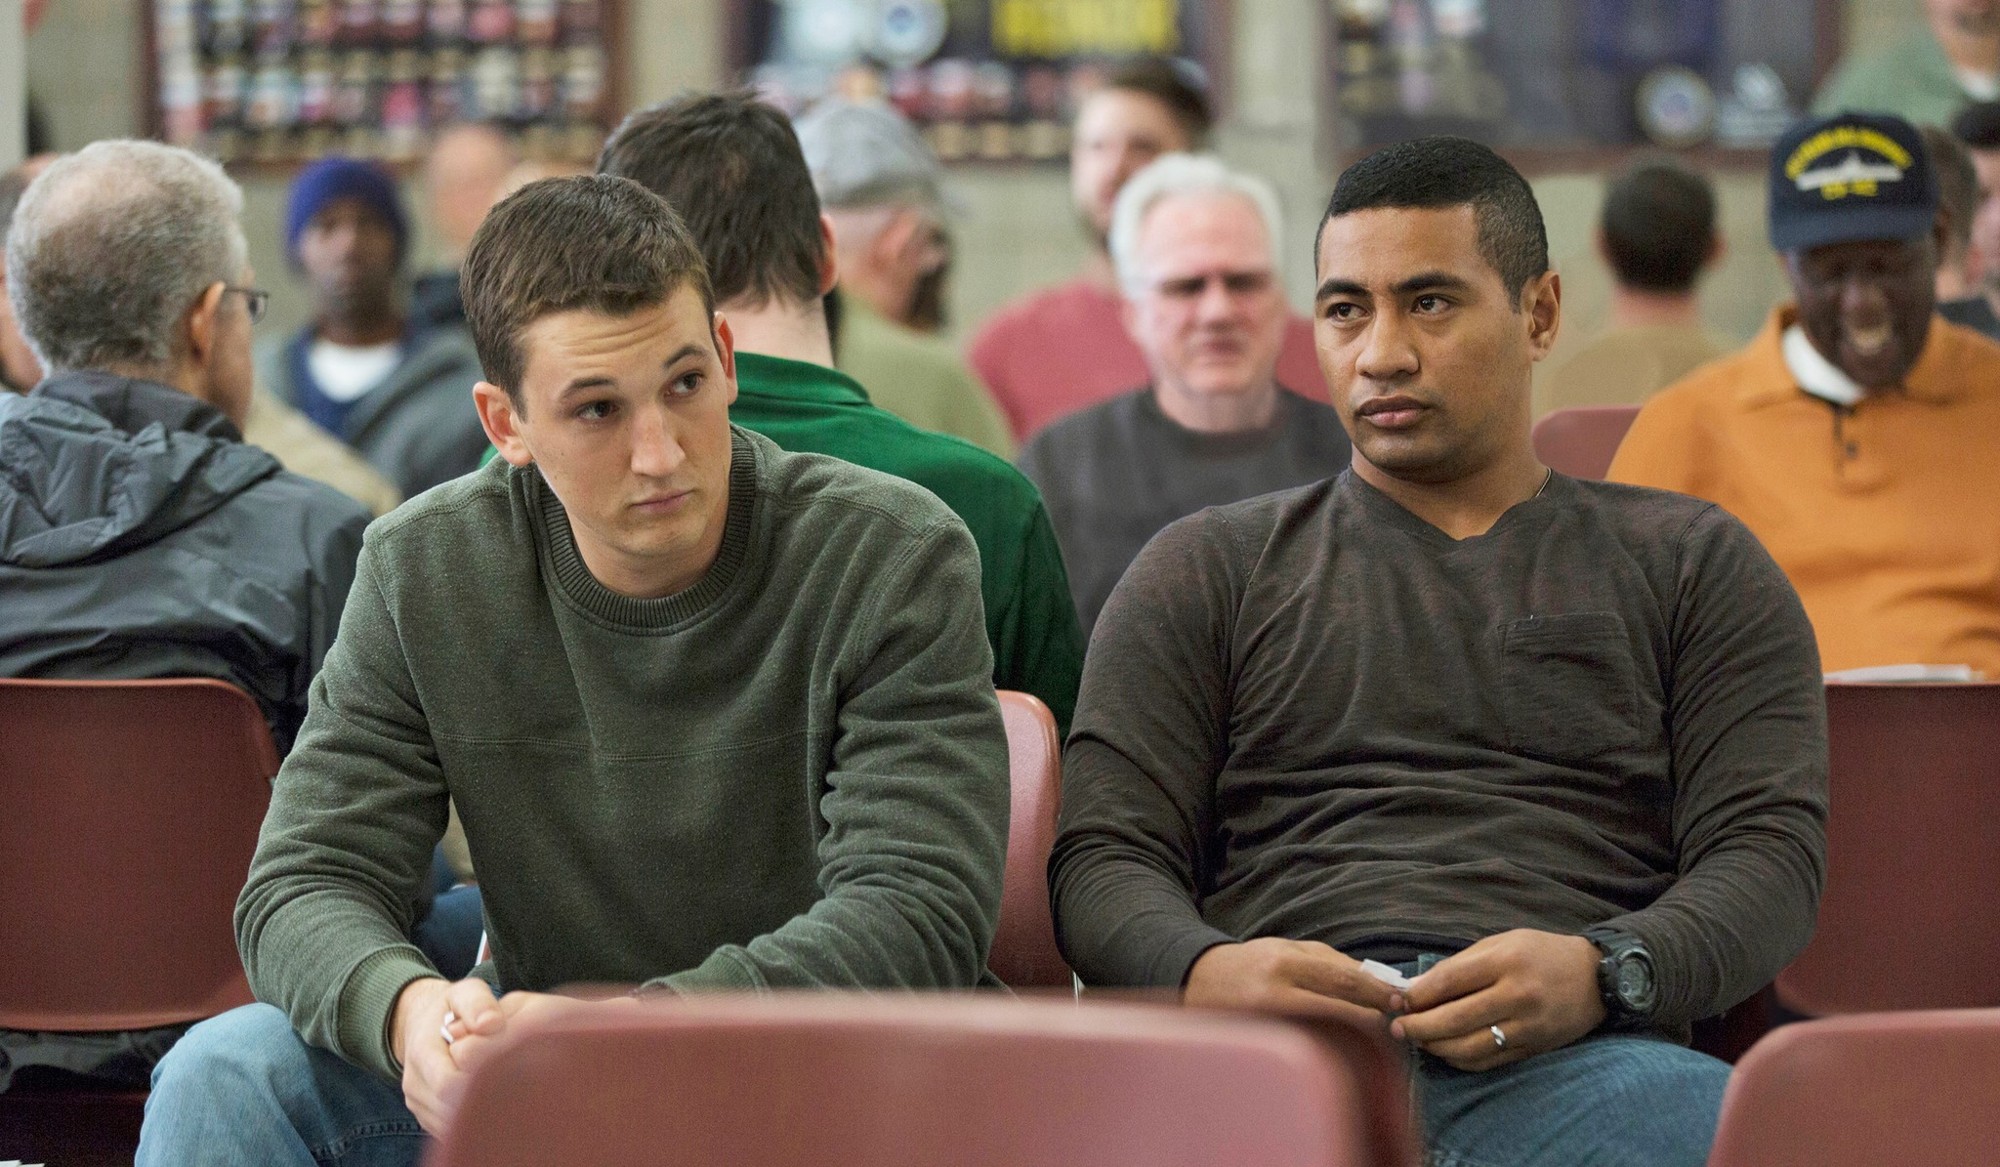 Miles Teller stars as Adam Schumann and Beulah Koale stars as Solo in Universal Pictures' Thank You for Your Service (2017)